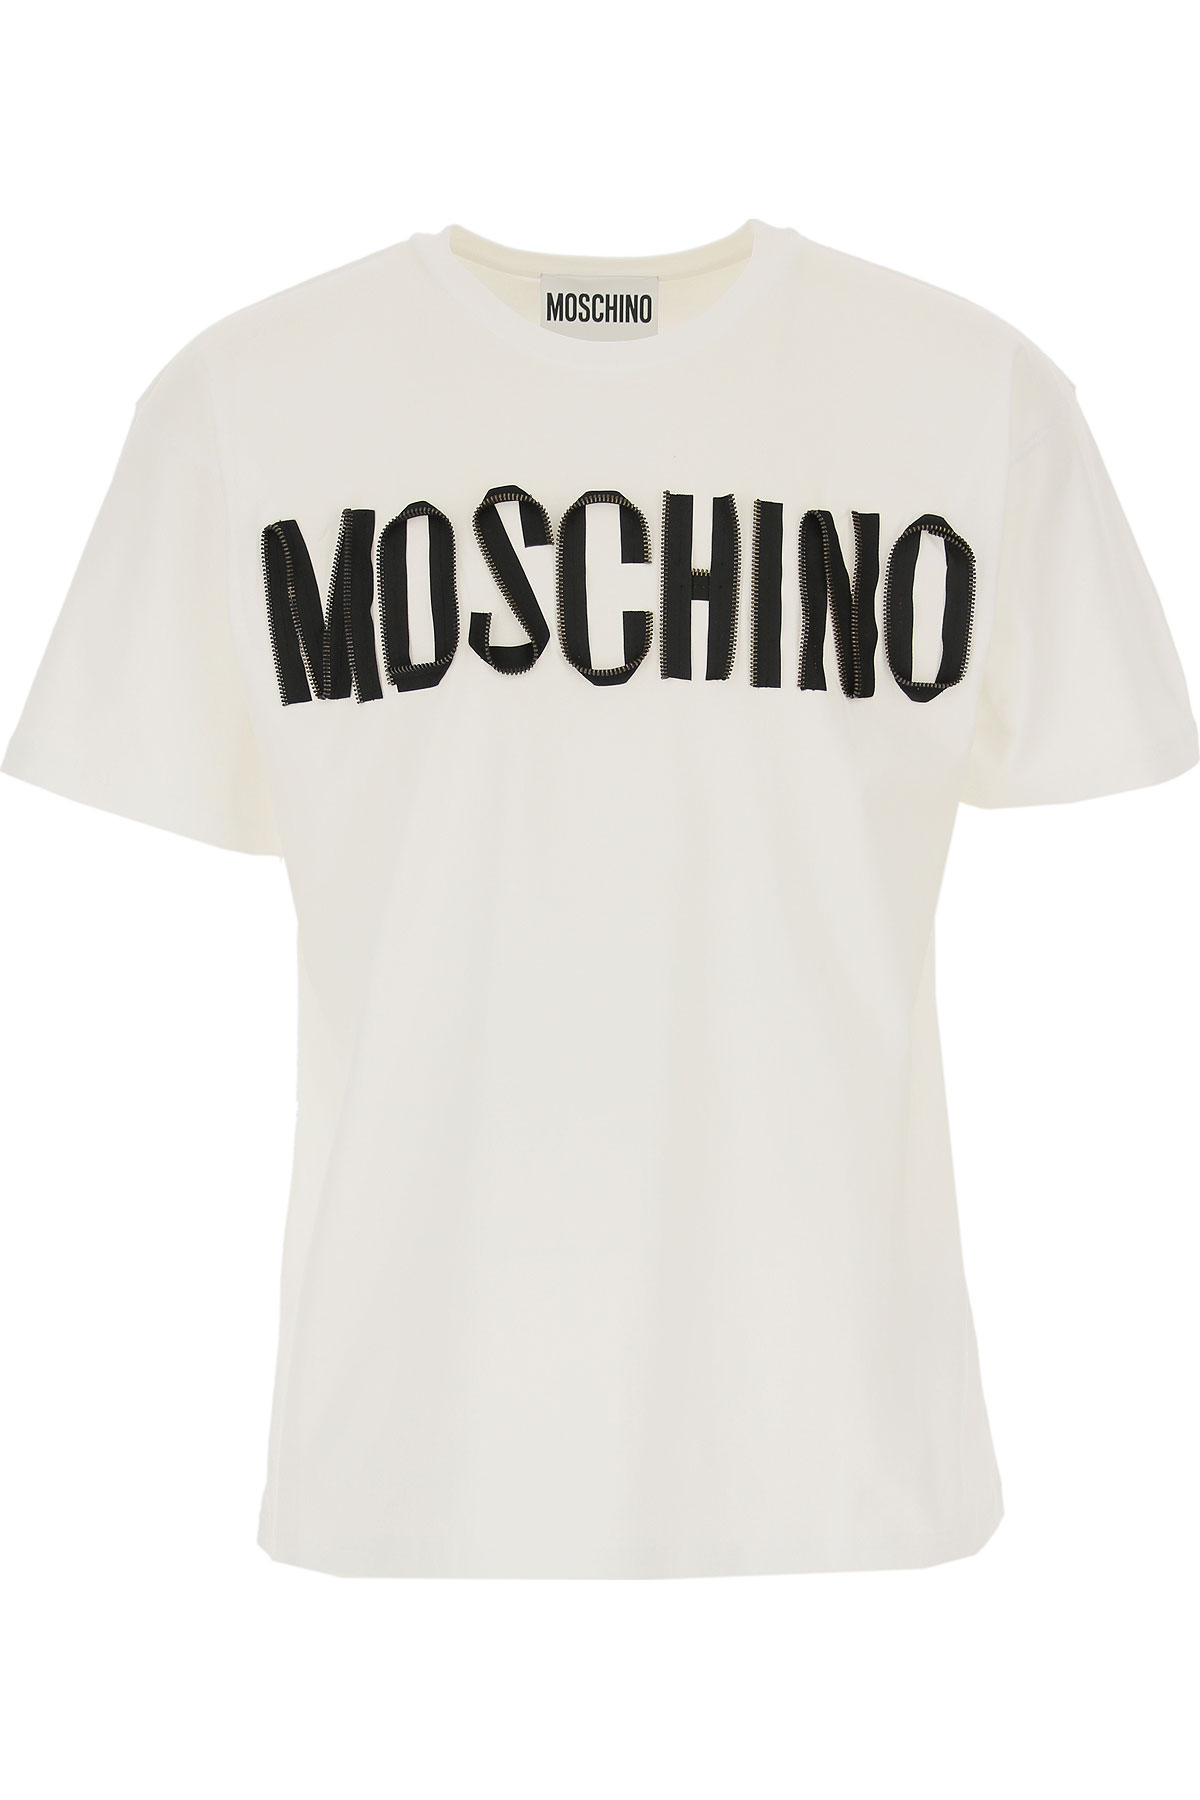 Mens Clothing Moschino, Style code: a0704-2040-1001